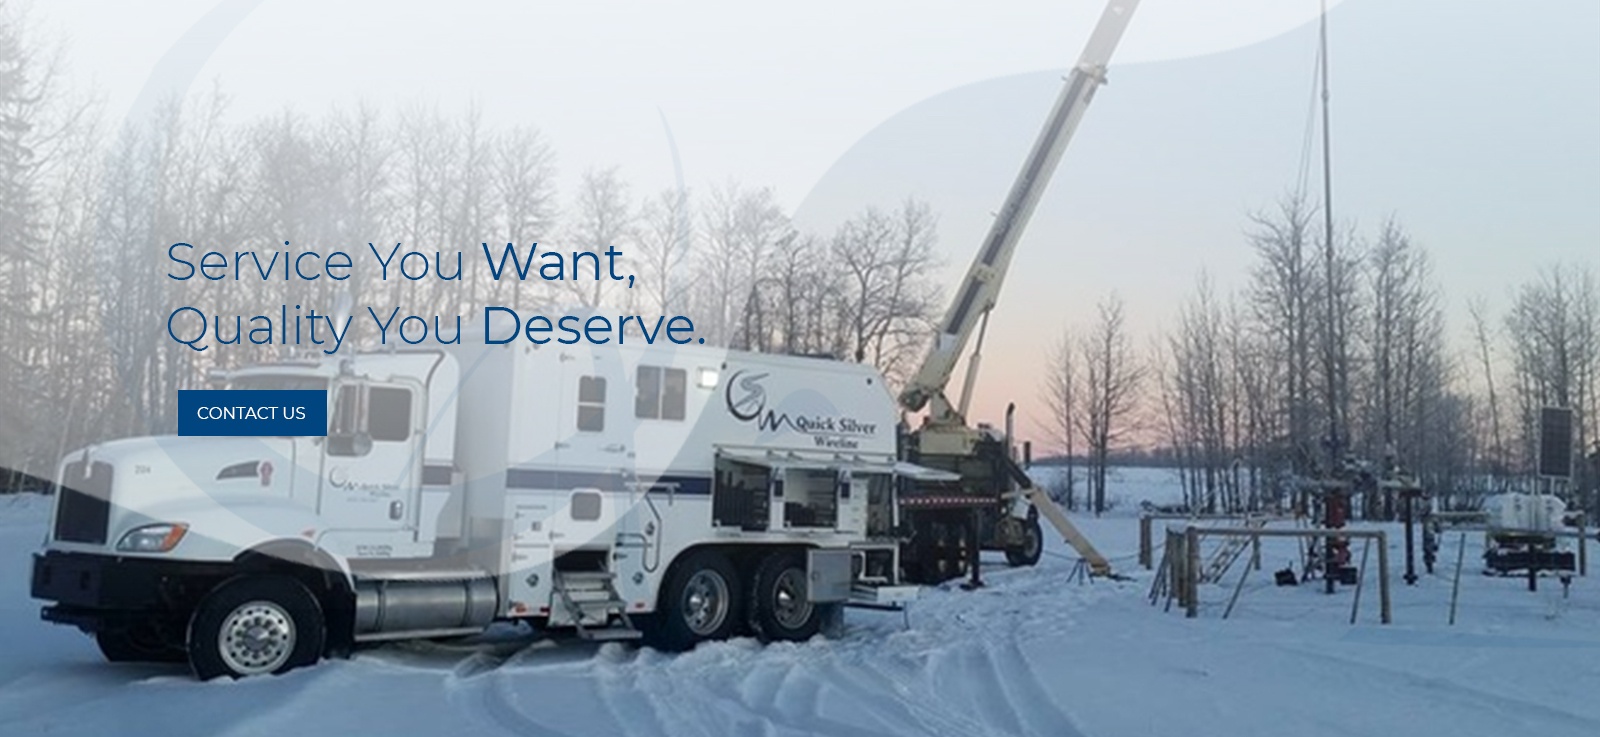 Offset Well Monitoring Services by Wireline Company in Alberta - Quick Silver Wireline